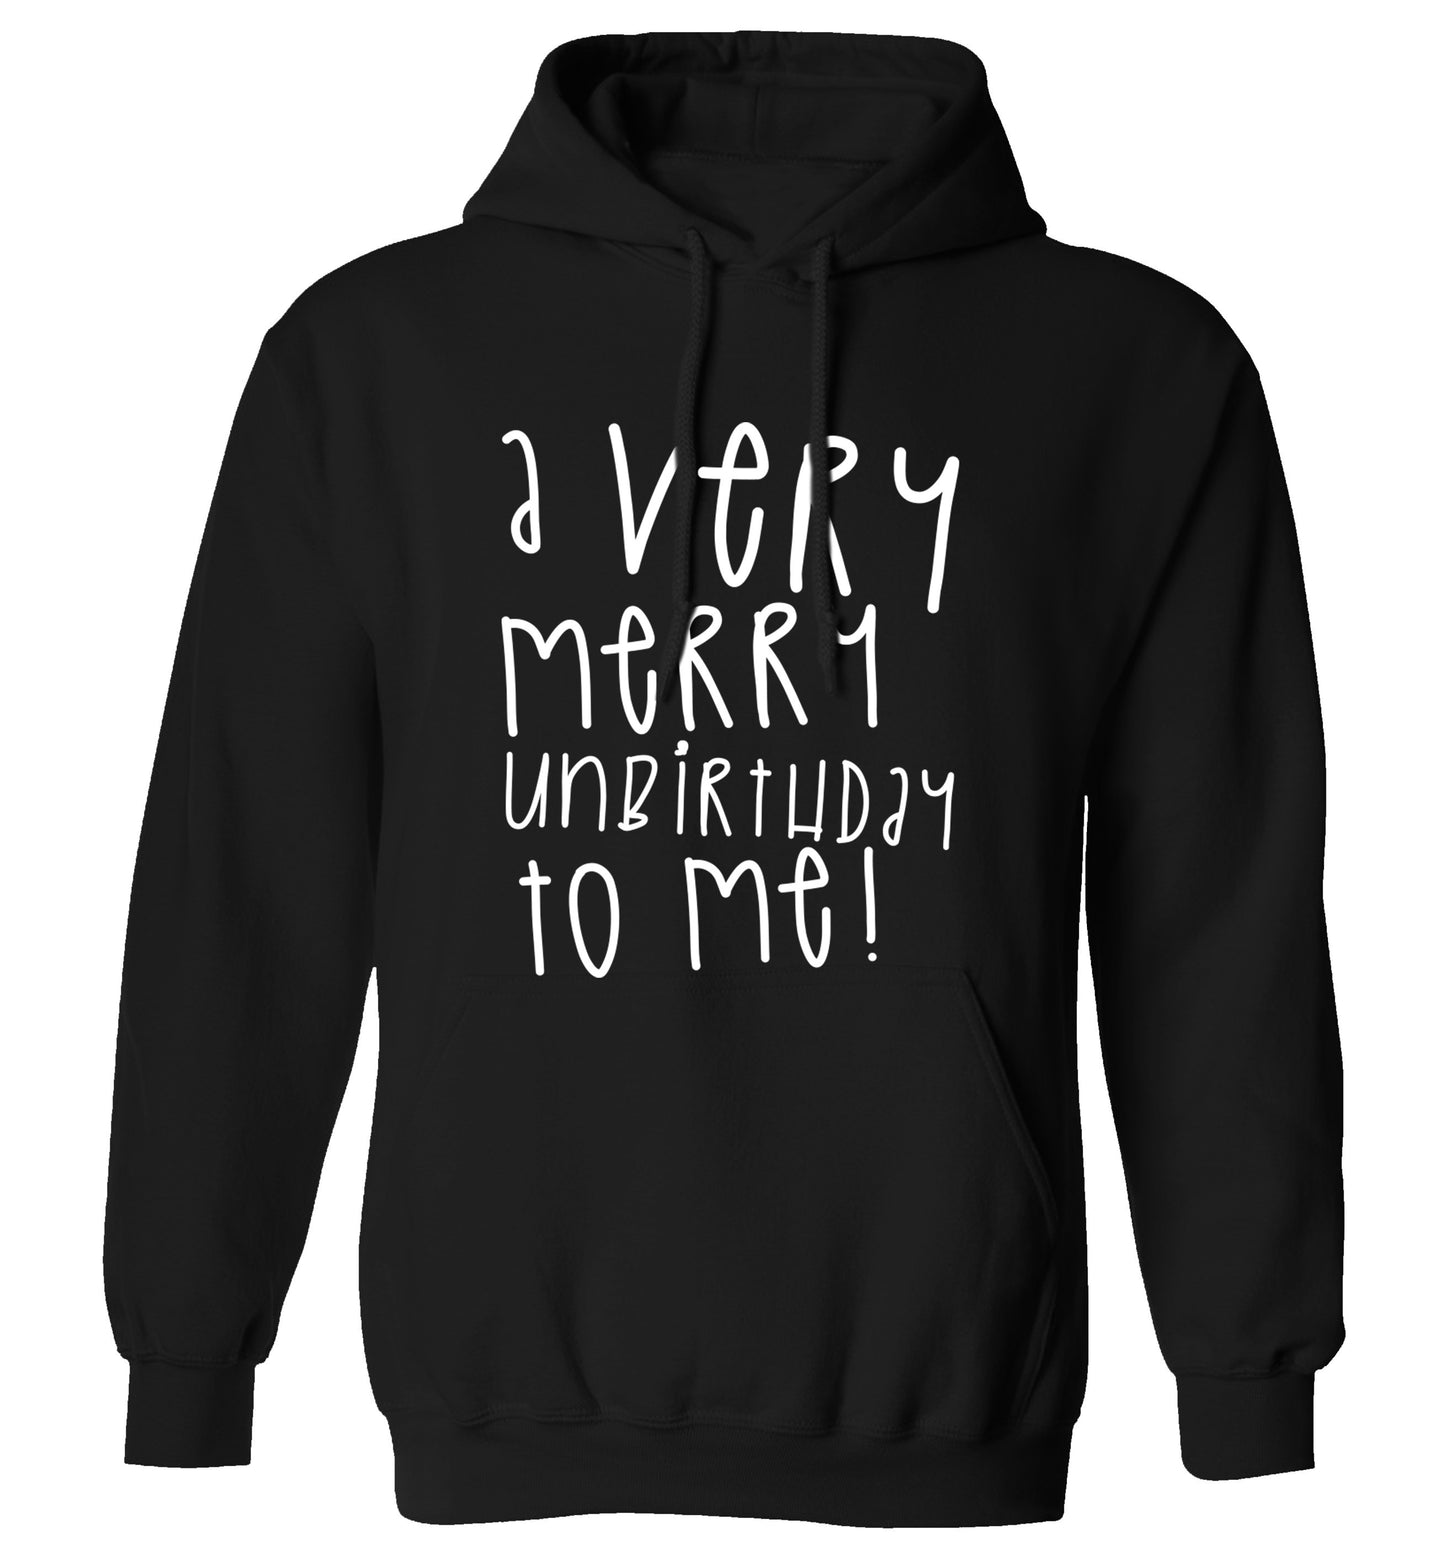 A very merry unbirthday to me! adults unisex black hoodie 2XL